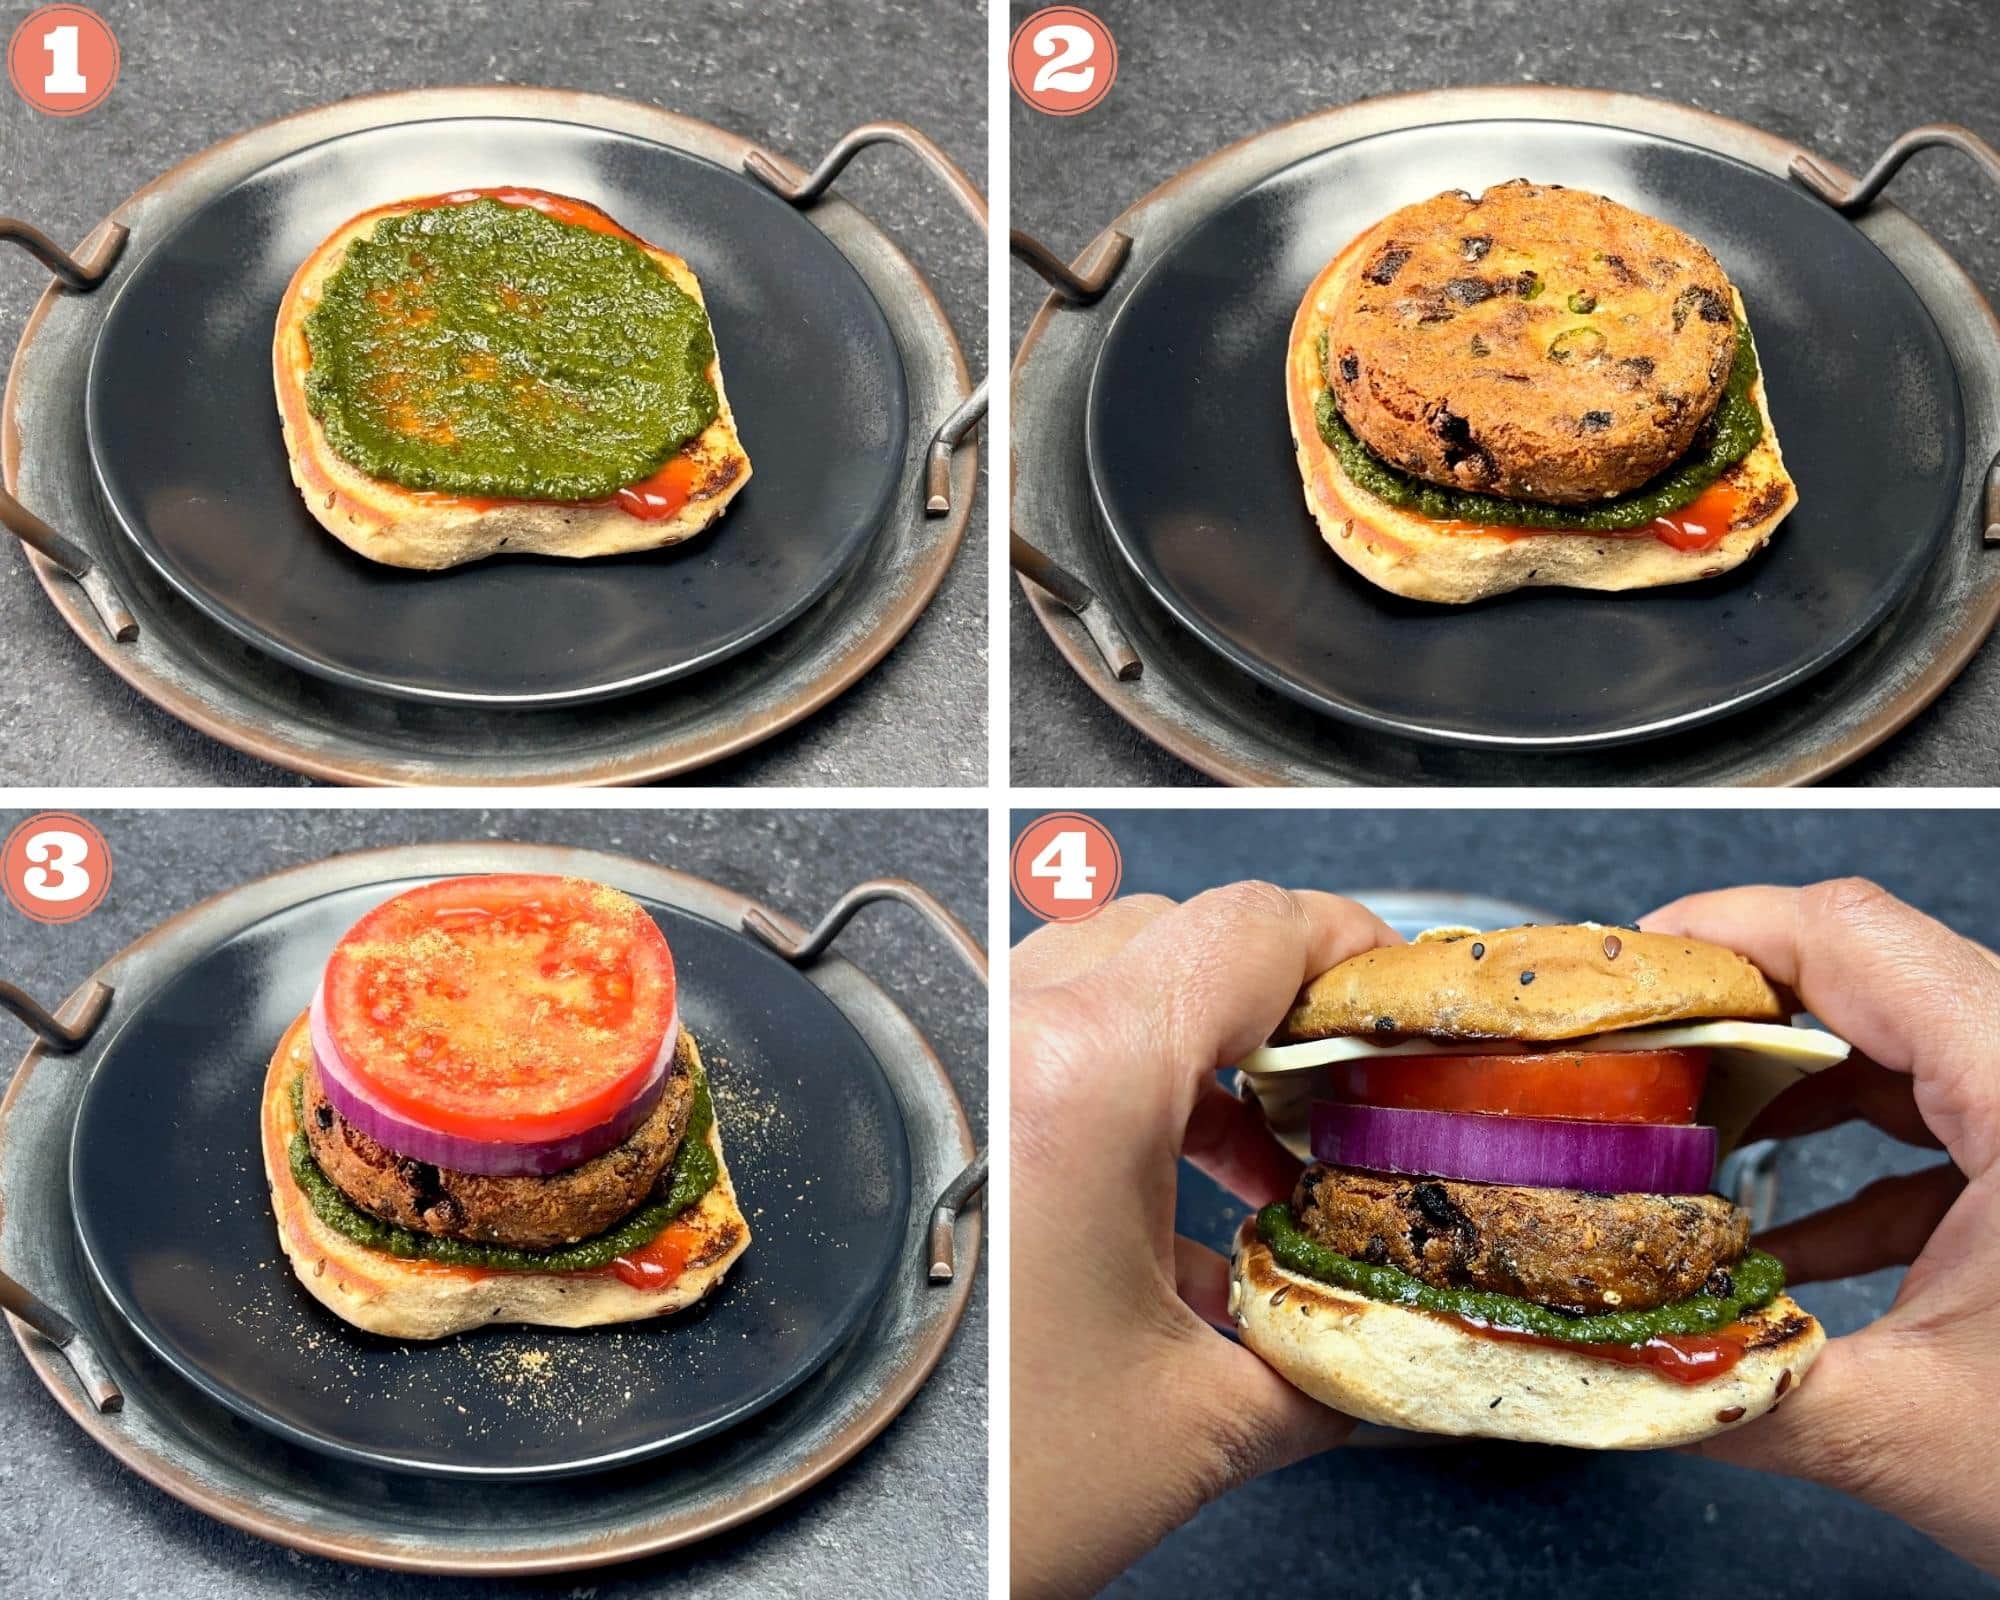 step by step images of an aloo tikki potato patty being layered onto a toasted bun with chutney, ketchup, and burger toppings